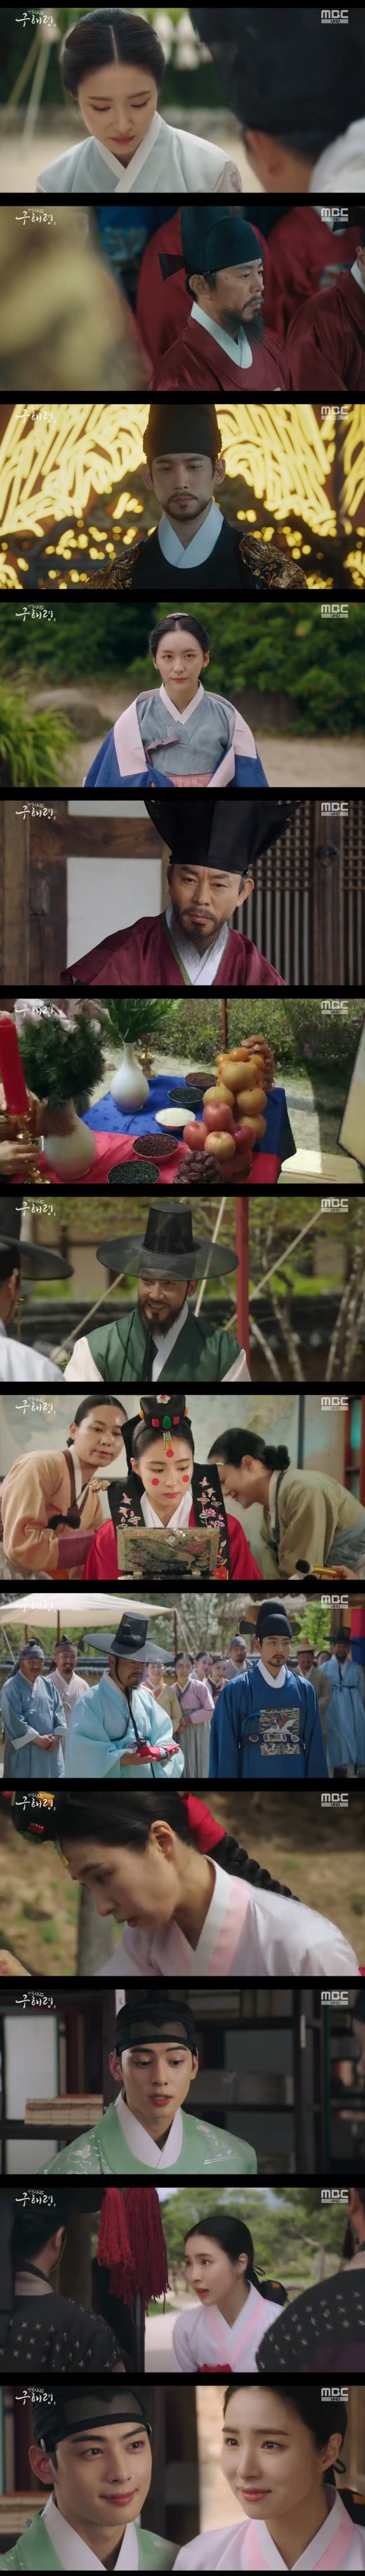 (Seoul=) = Newcomer Rookie Historian Goo Hae-ryung Shin Se-kyung decided to become a first lady.On the afternoon of the 18th, MBC tree drama New cadet Rookie Historian Goo Hae-ryung Rookie Historian Goo Hae-ryung (Shin Se-kyung) moved to the first lady test center on the day of the wedding.On this day, Min Ik-pyeong (Kim Sang-moon) of the left-wing party proposed a Mrs.Later, Lee Jin (Park Ki-woong) said, The taxpayer breaks down the system of Mrs. Min Ik-pyeong, a left-wing party, who was proposed before the full moon.The tense is determined by the taxpayer myself. It belongs to the authority status. What kind of code in this country can only see the past? said Lee. If there is a talent, I will be willing to give it to a woman.Rookie Historian Goo Hae-ryung was told by his brother Koo Jae-kyung (Fairy-hwan) that I found your place; I will have a lead soon.Rookie Historian Goo Hae-ryung didnt look good all along, but he was well prepared to marry.And on the day of the wedding, when everything was about to proceed calmly, the groom confessed, Im sorry, I cant marry this. I turned around, saying Im sorry.At this time Rookie Historian Goo Hae-ryung also fled; she hurriedly tossed off her wedding dress and crossed the wall.Rookie Historian Goo Hae-ryung ran where the Mrs.Lee Rim (Cha Eun-woo) was called to Crown Prince Binjin (Park Ki-woong).I want to find something, but I do not find it, Lee said. I still have not found the tense of my wifes star.Irim said, I do not have a book, but I know that I should not make it from this book. Find a person who will not be afraid of the king, the taxa, and the deputies.She is such a strange woman, like a bull, and her guts are like a longevity. Asked about this Joseon Dynasty land, Irim smiled, saying, There will be.I am curious about the future development of Rookie Historian Goo Hae-ryung, who gave up marriage and visited his dream.Meanwhile, the fact that Irim is a love novelist, Plum, also entered the kings ear. The king said, Did you intend to hurt my face?I have never had a seed as ugly as you. Burn all the books. Take away all the paper, brushes, and writings.From today, Daewon Daegun should not write even if he reads a single book. Irim said, I will not write again to the world. Please take your name. I can only read and write. Without it, I have nothing.New cadet Rookie Historian Goo Hae-ryung is a drama depicting the first problematic first lady () of Joseon Dynasty and the Phil full romance annals of Prince Irim, the anti-war mother solo, broadcast every Wednesday and Thursday at 8:55 p.m.